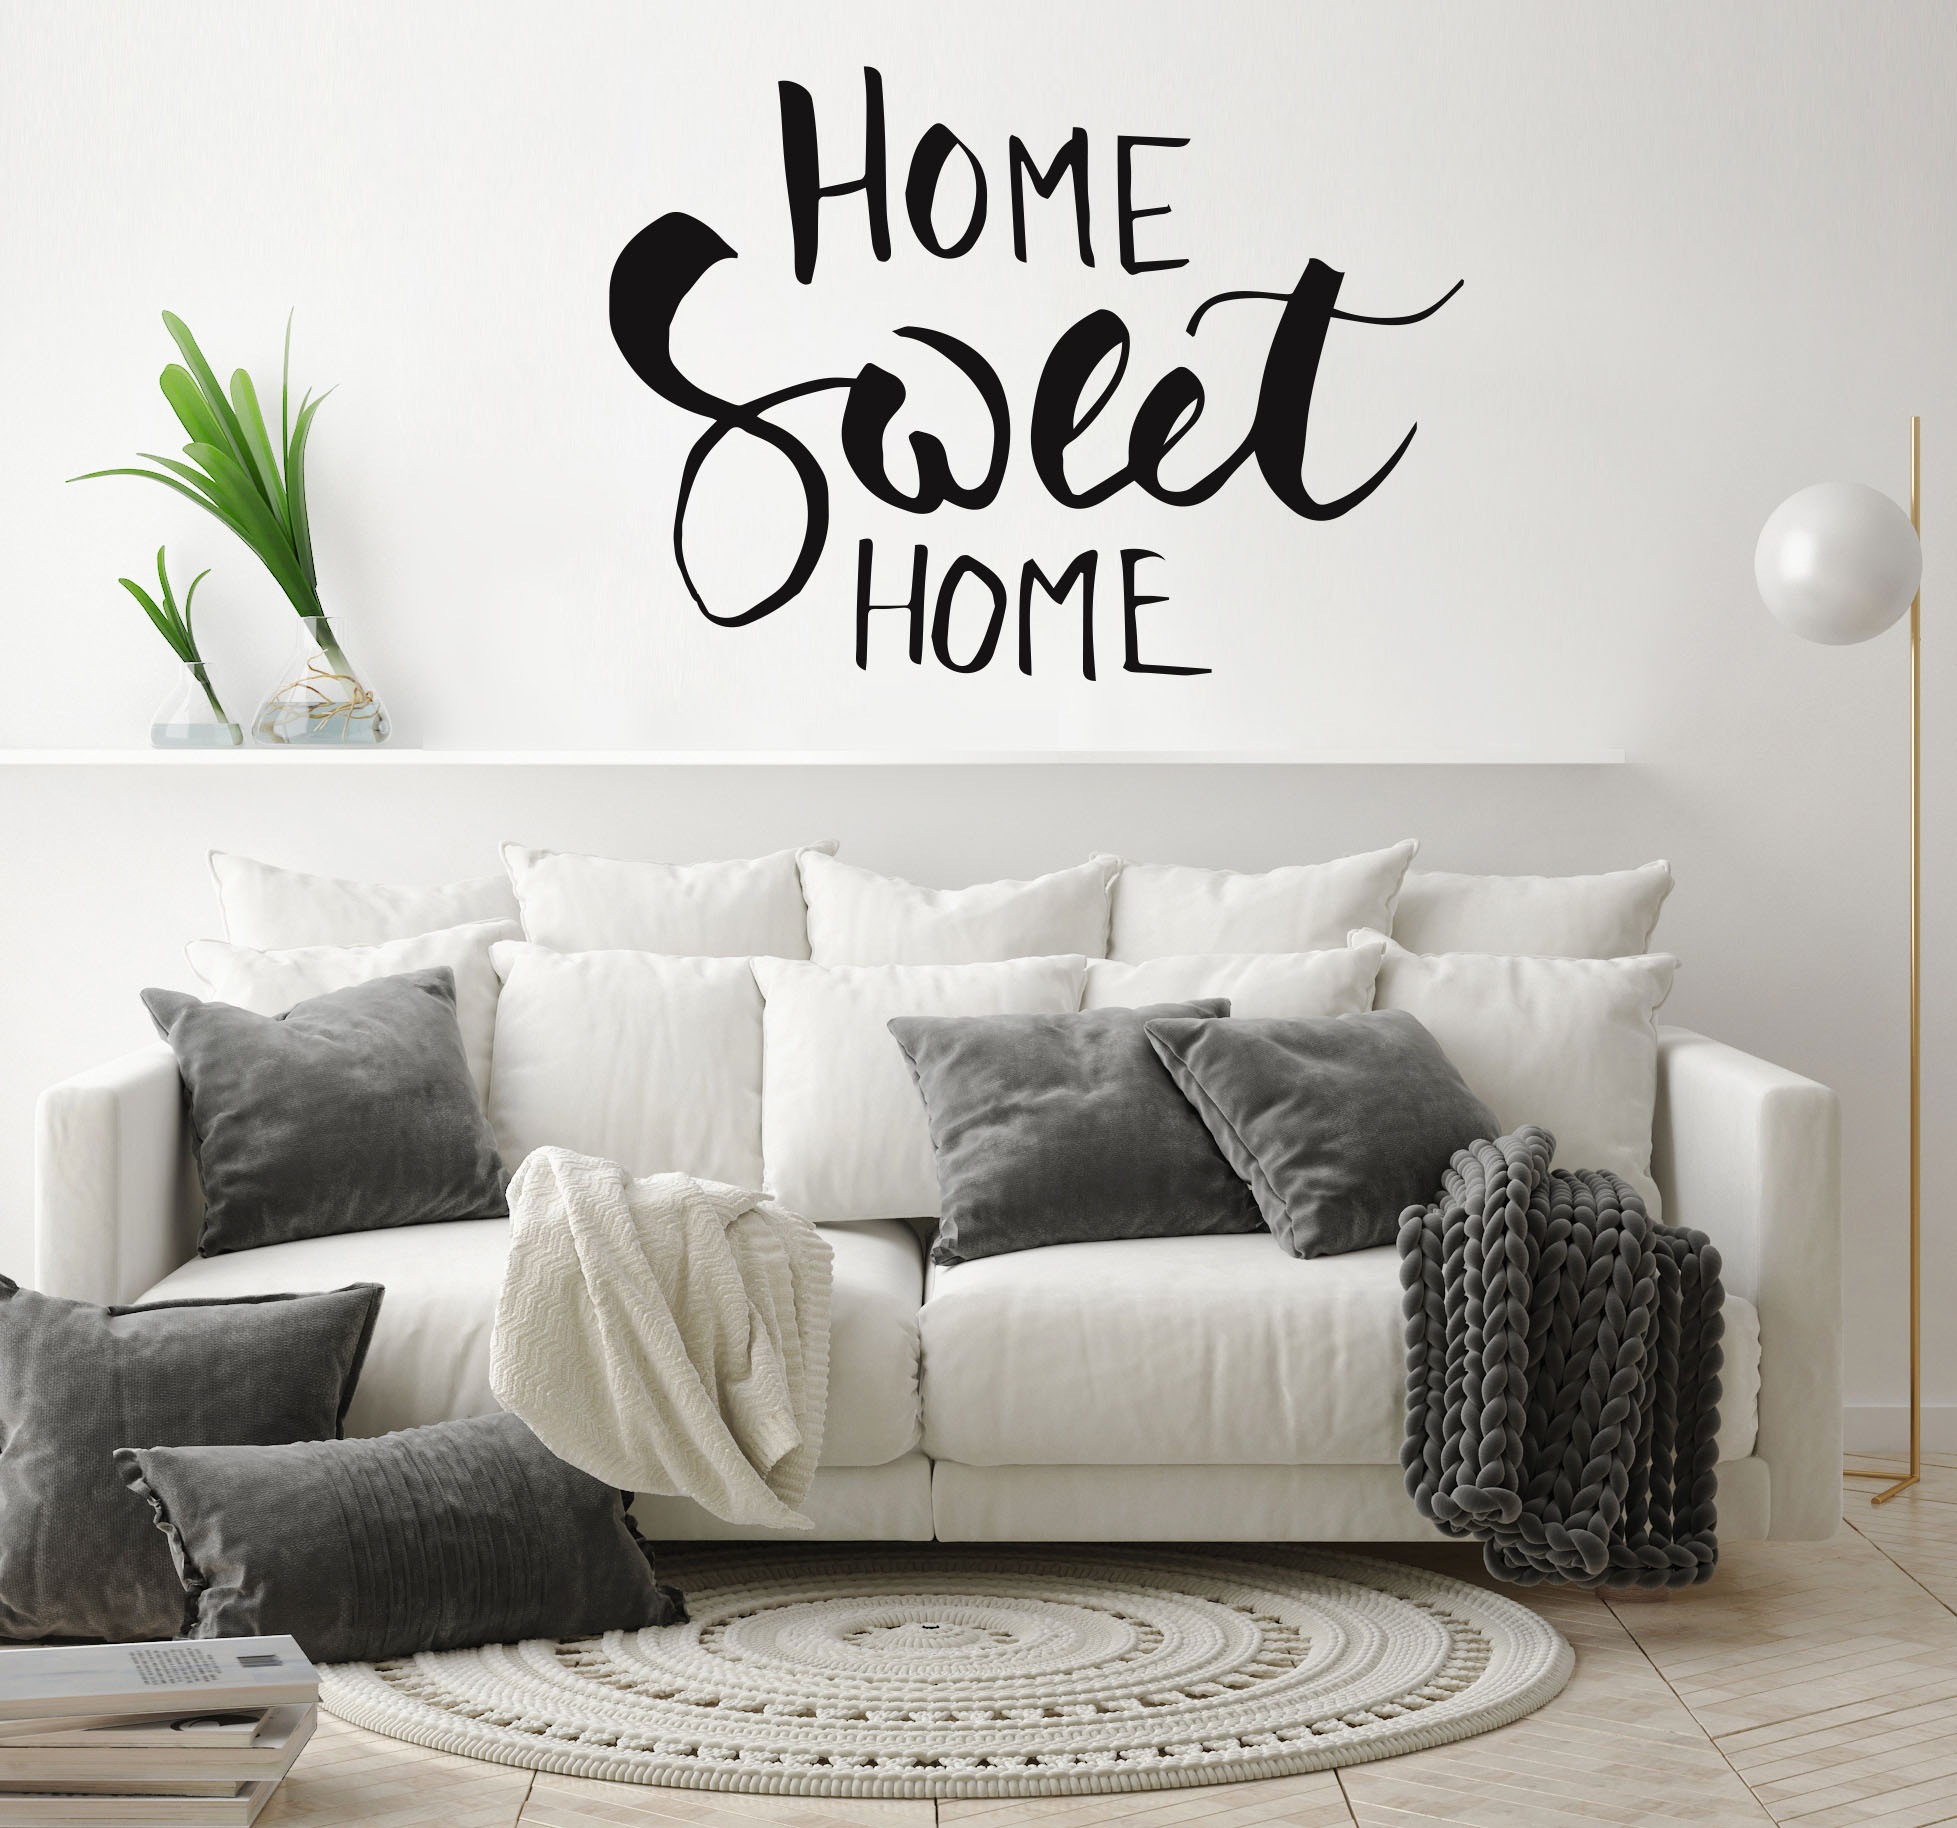 queence Wandtattoo »HOME St.) bequem HOME«, (1 kaufen SWEET